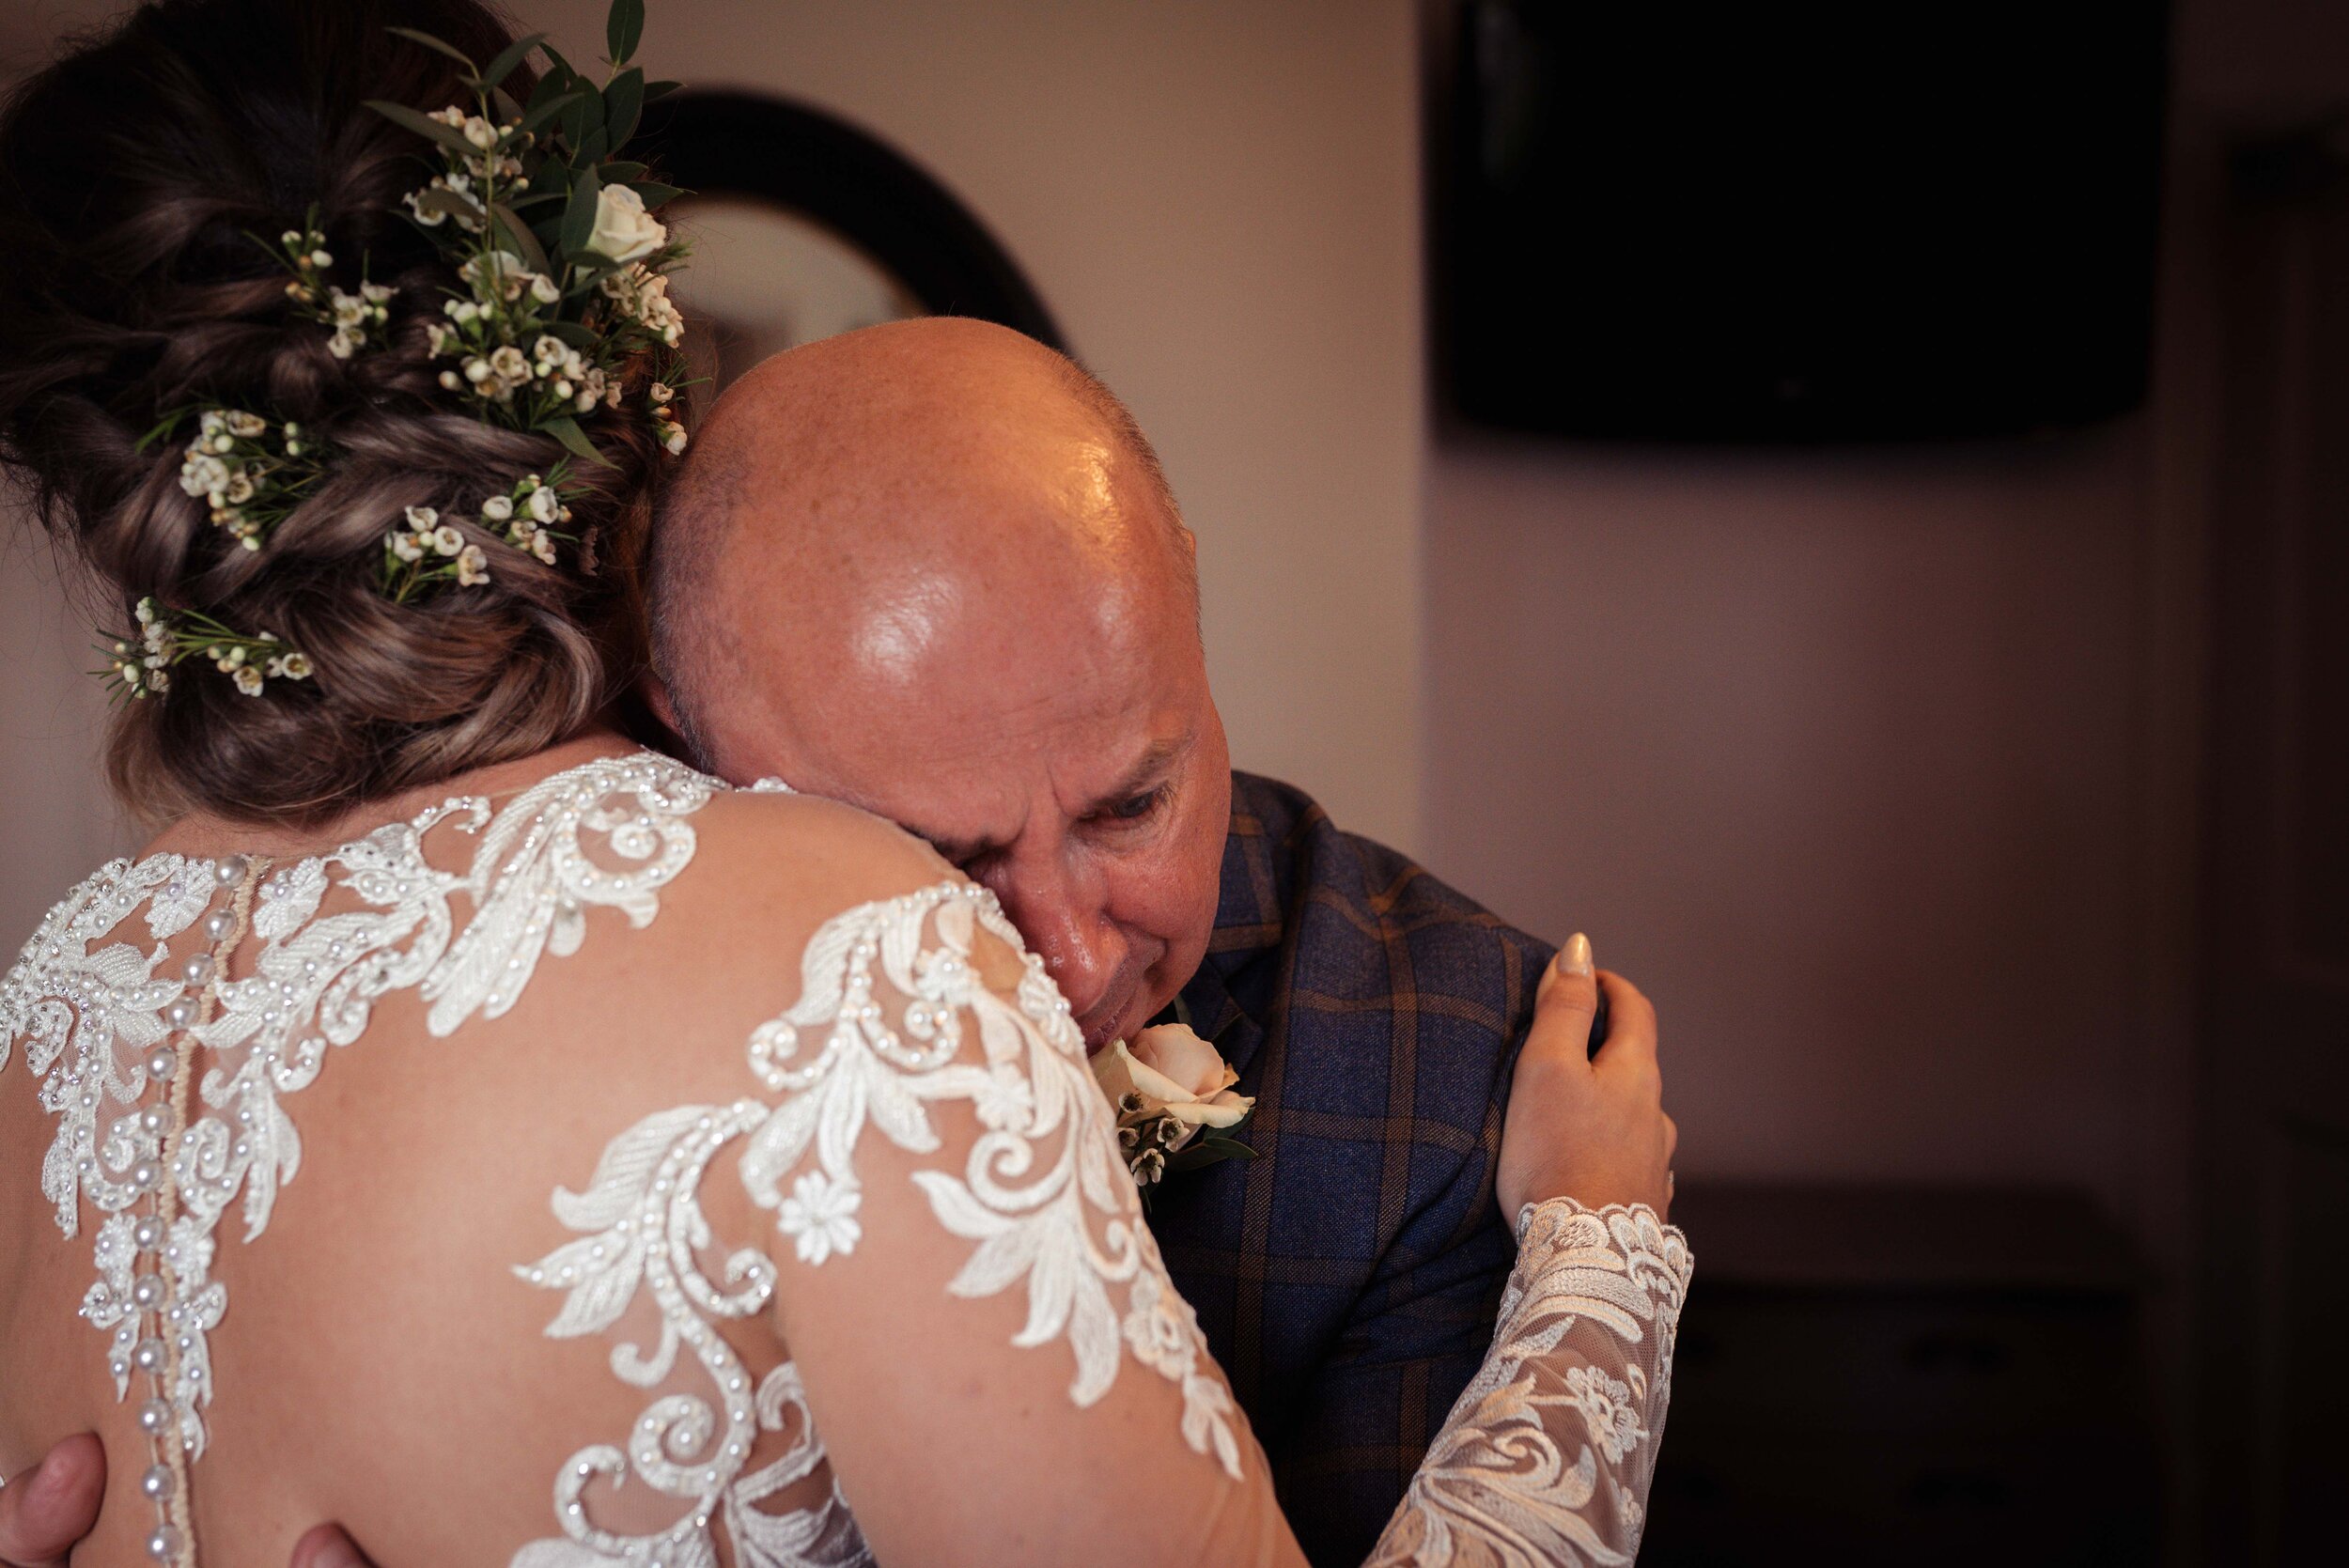 Father of the bride gives his daughter a cuddle